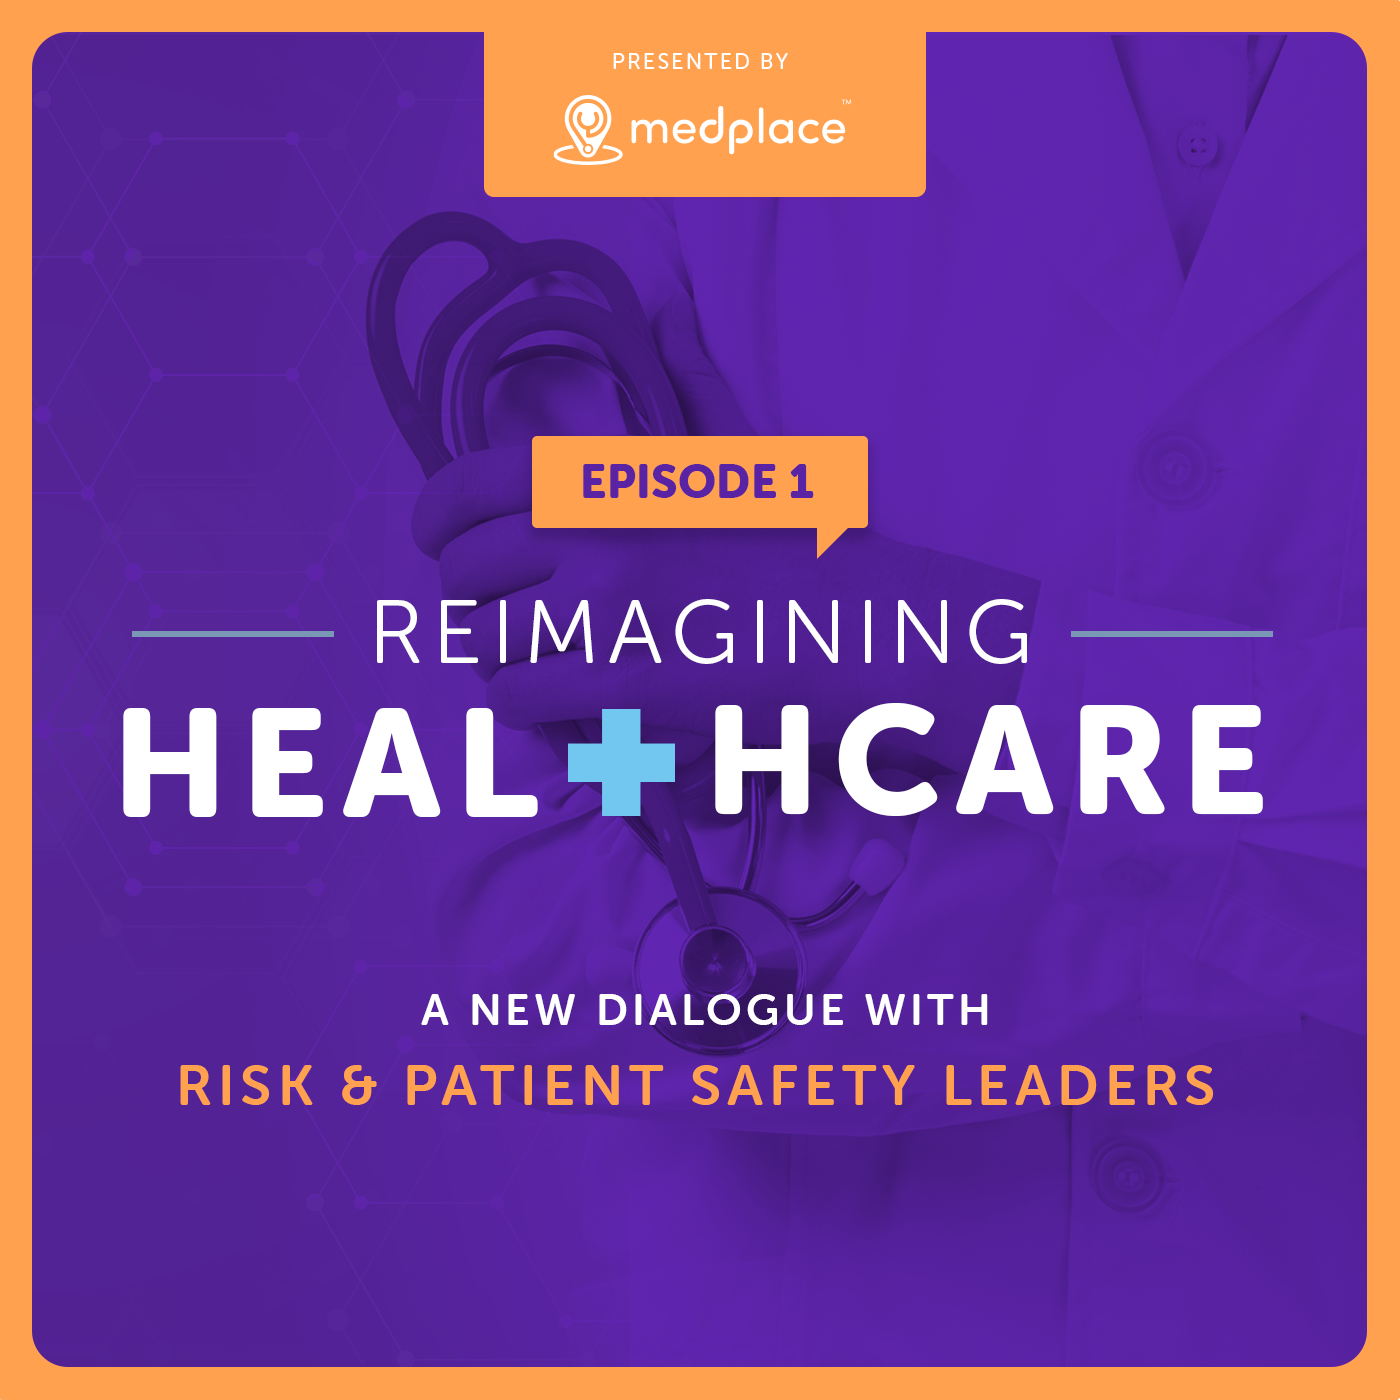 Episode 1 - Reimagining Healthcare - A New Dialogue with Risk and patient Safety Leaders